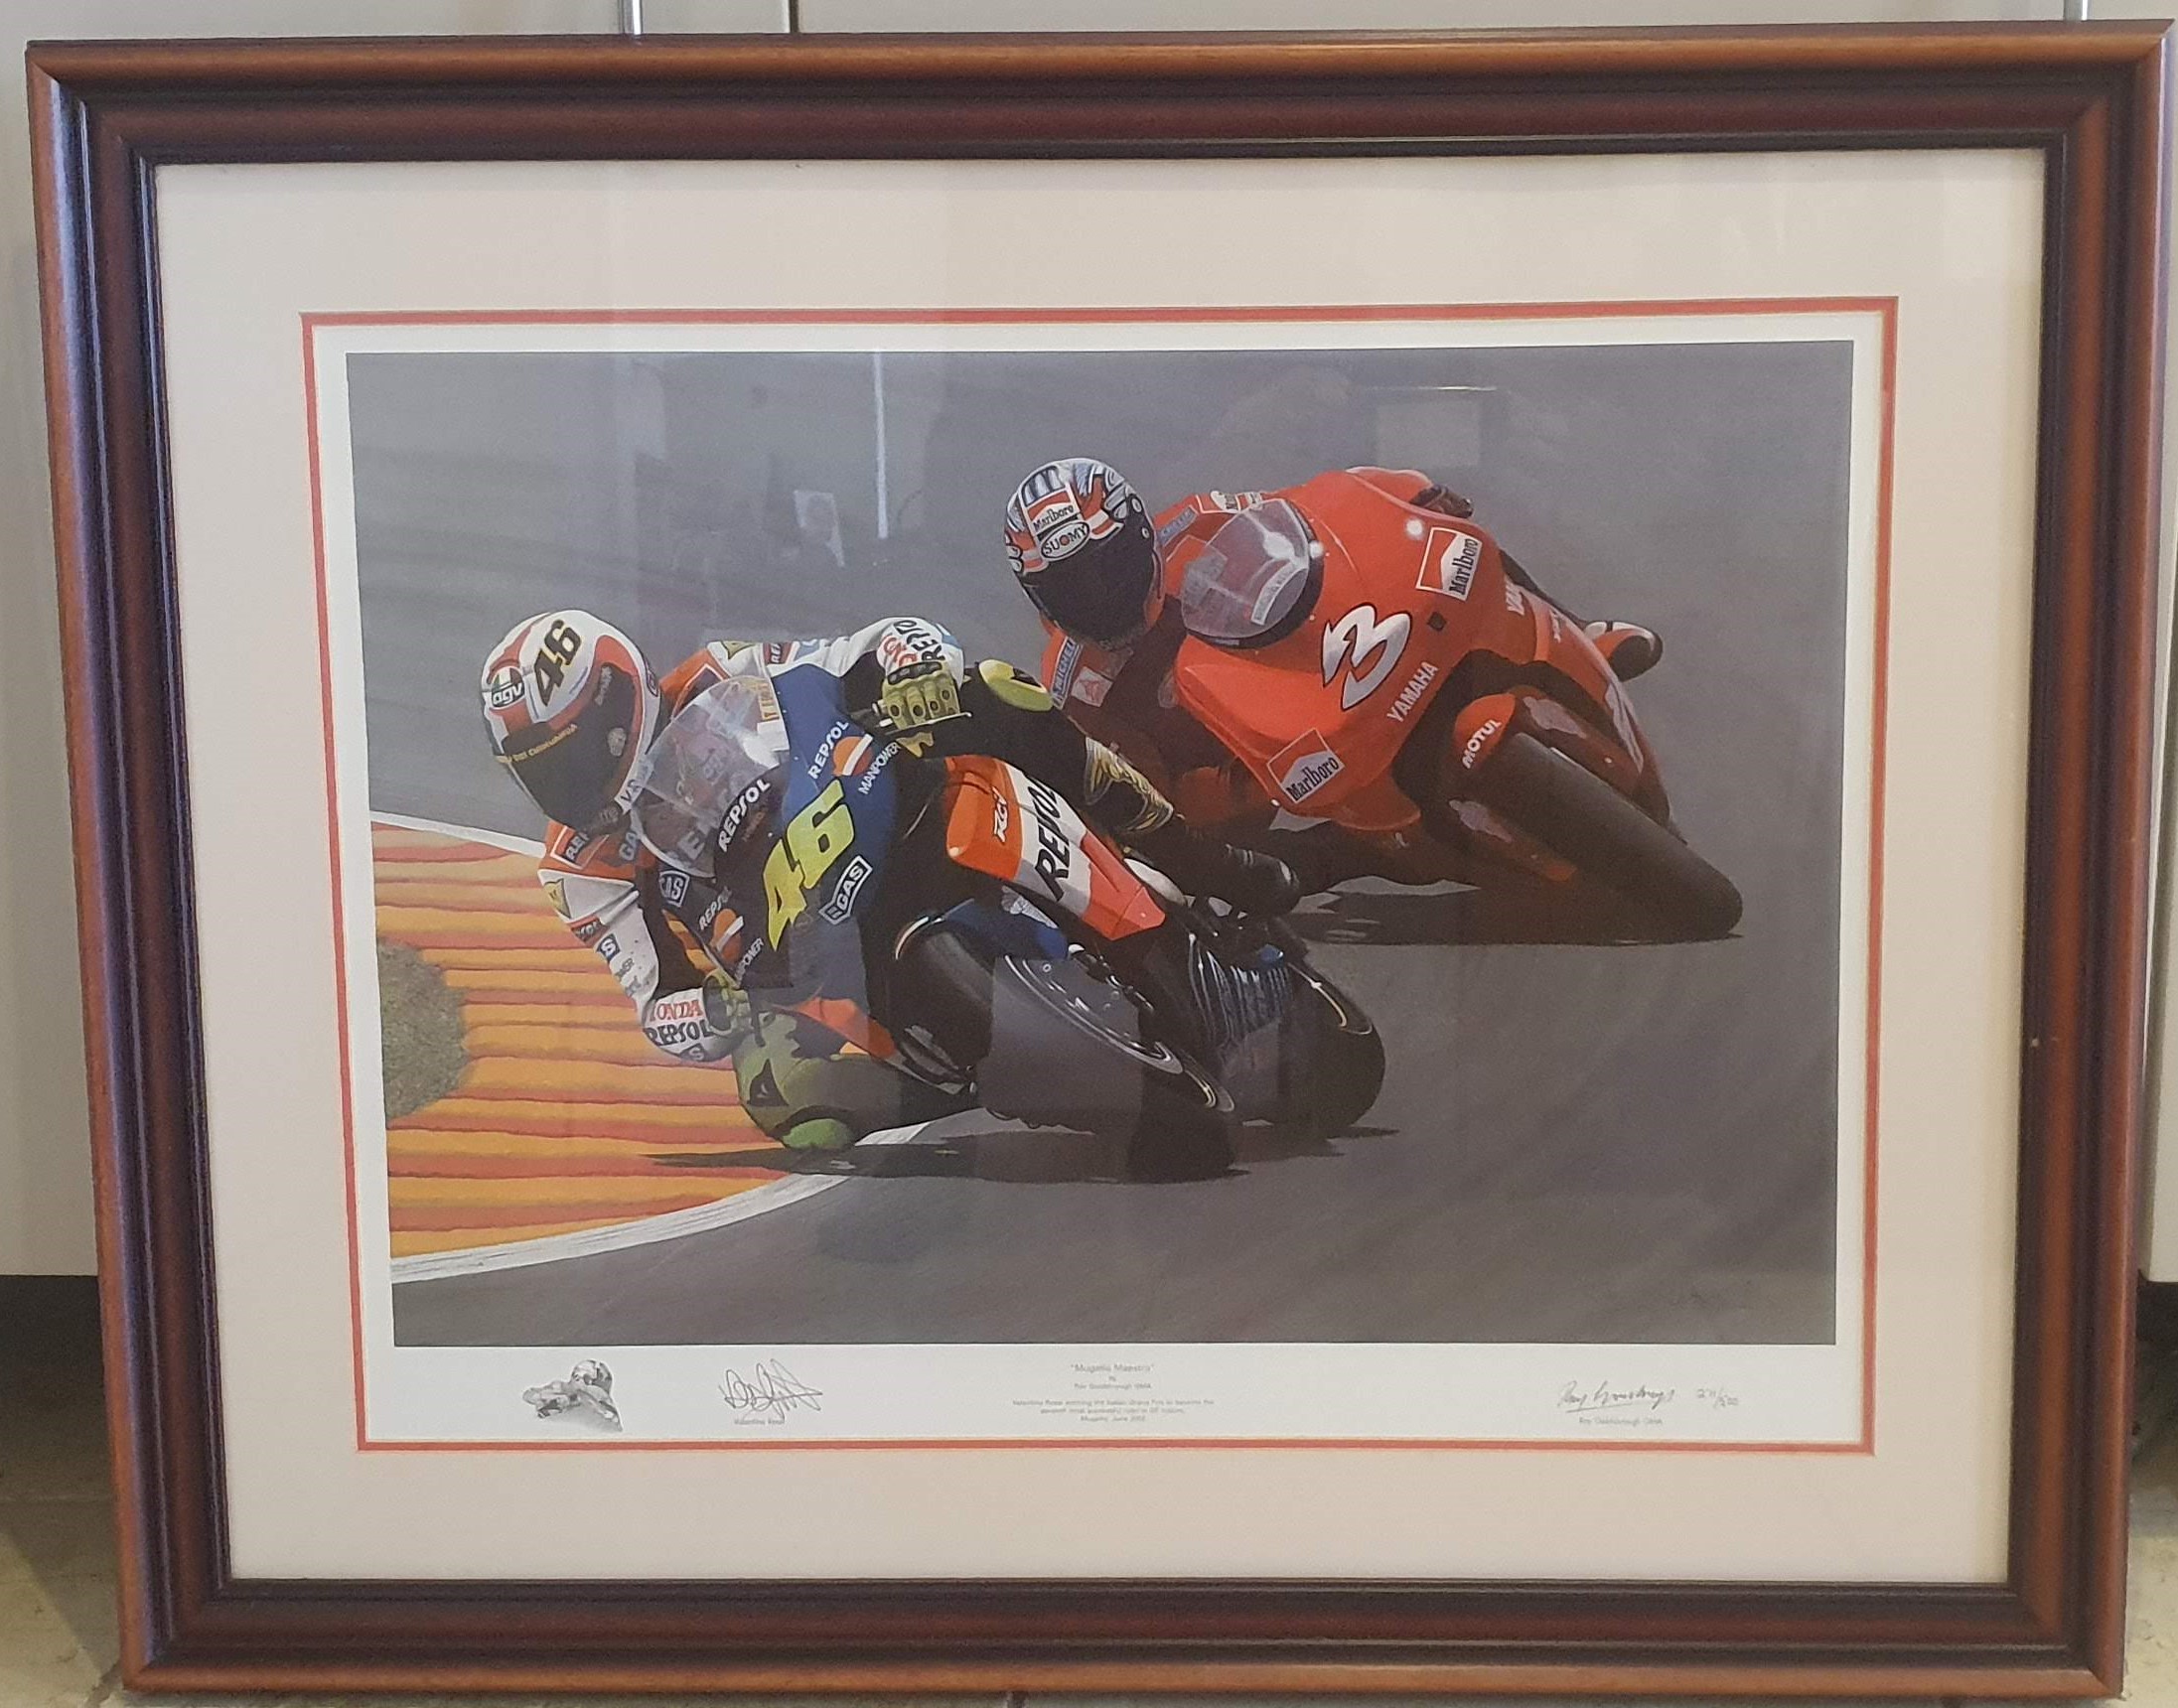 VR46 and Max Biaggi: limited edition signed colour print of painting